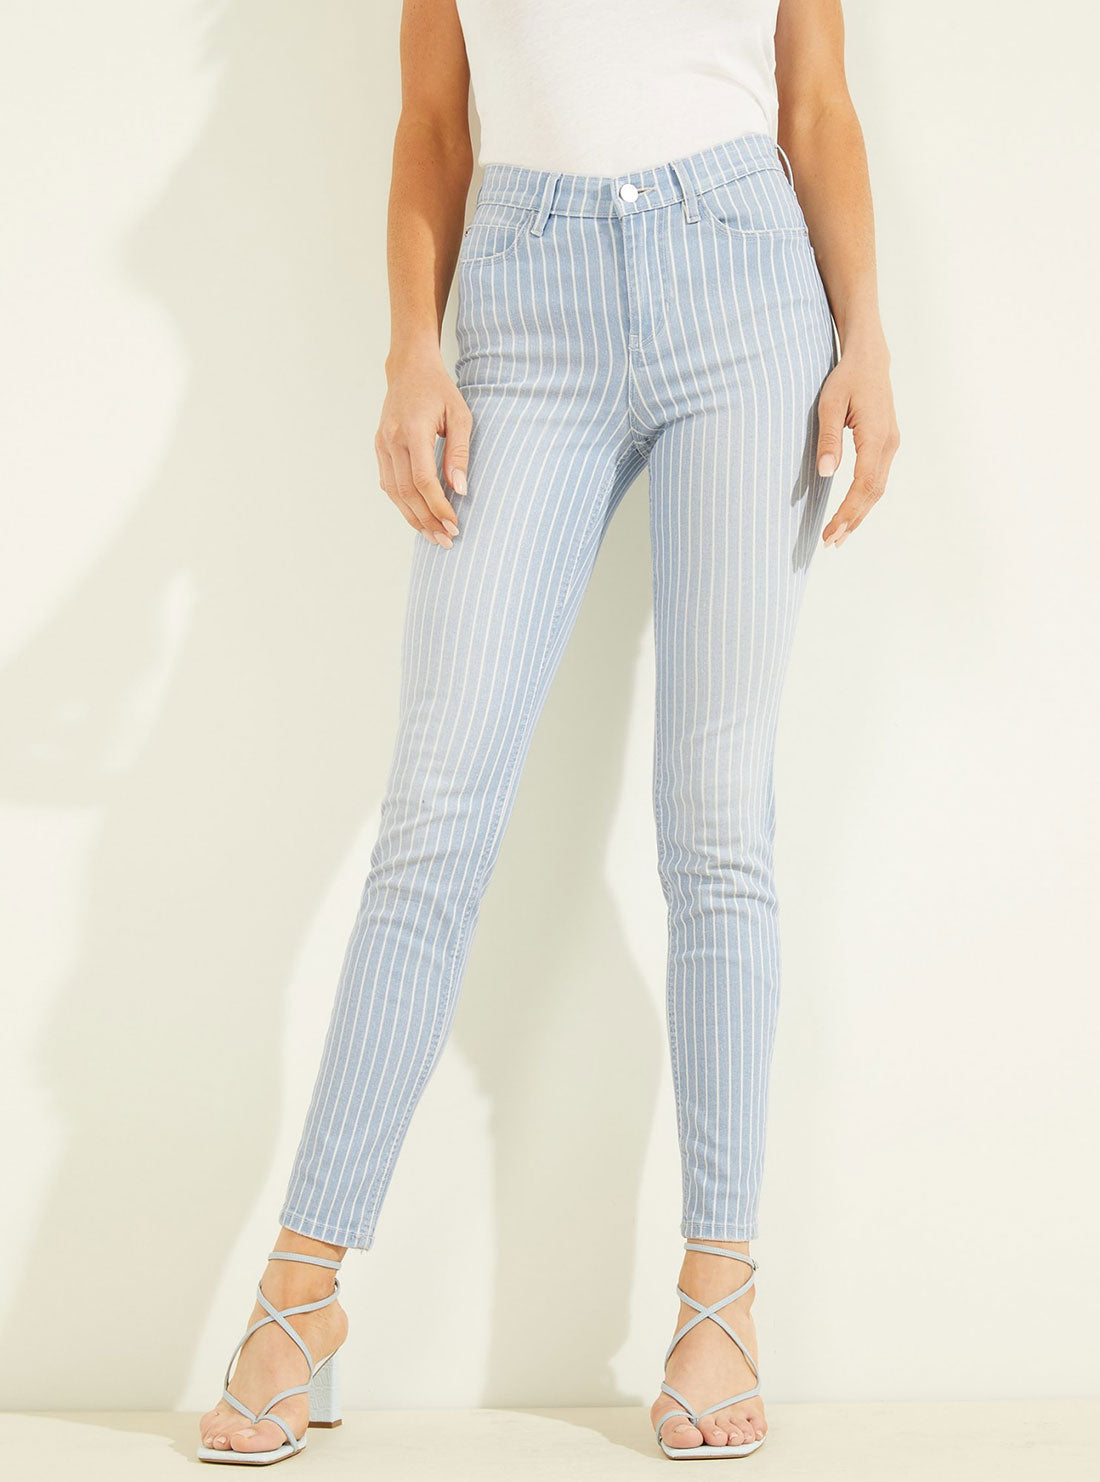 GUESS Womens High-Rise Skinny Fit 1981 Denim Jeans In Pinstripe Light Wash W2GA46D4DN5 Front View